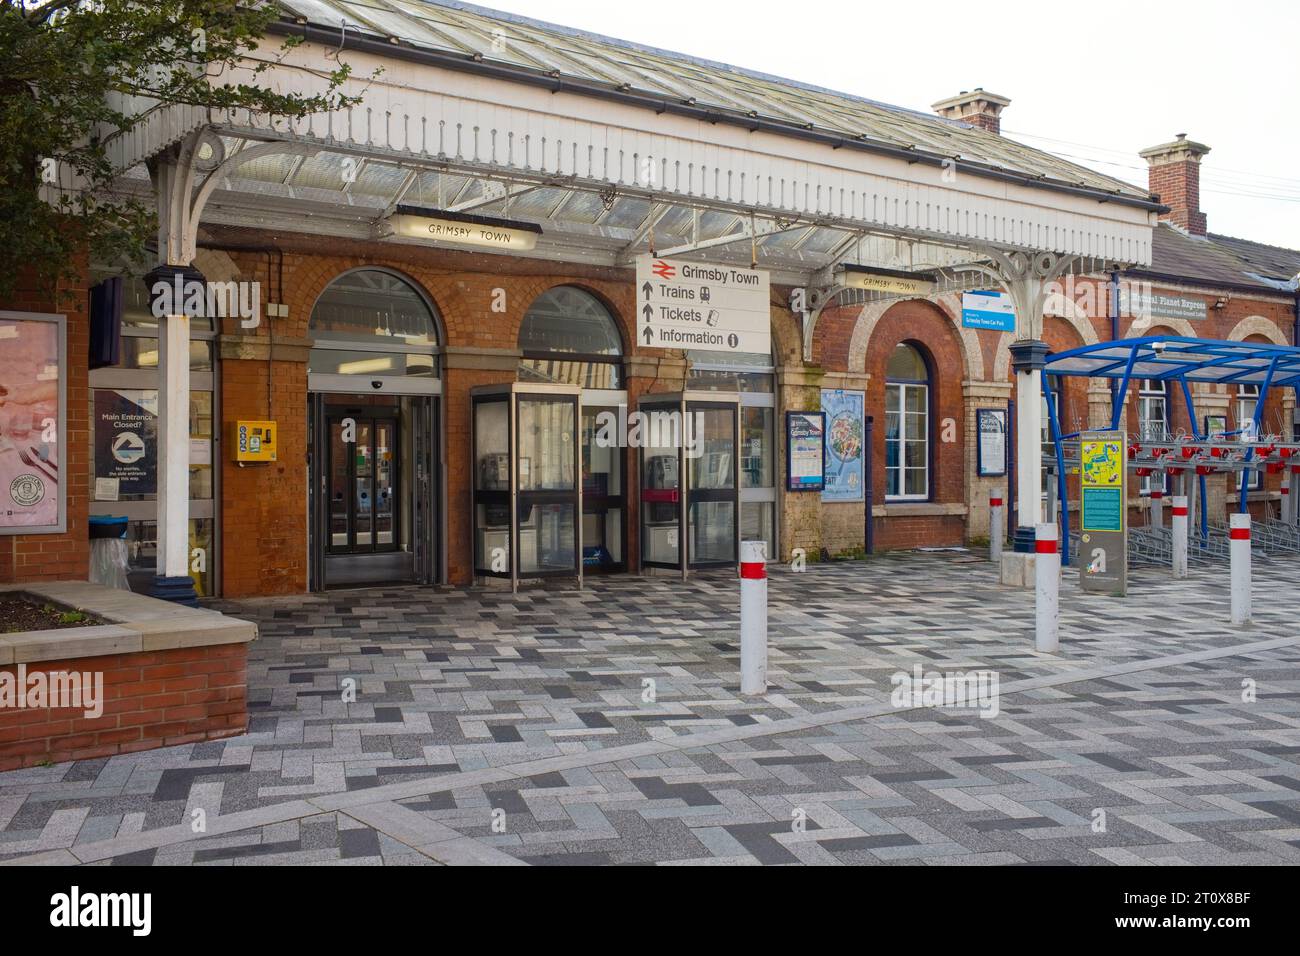 Grimsby Town railway station exterior Stock Photo